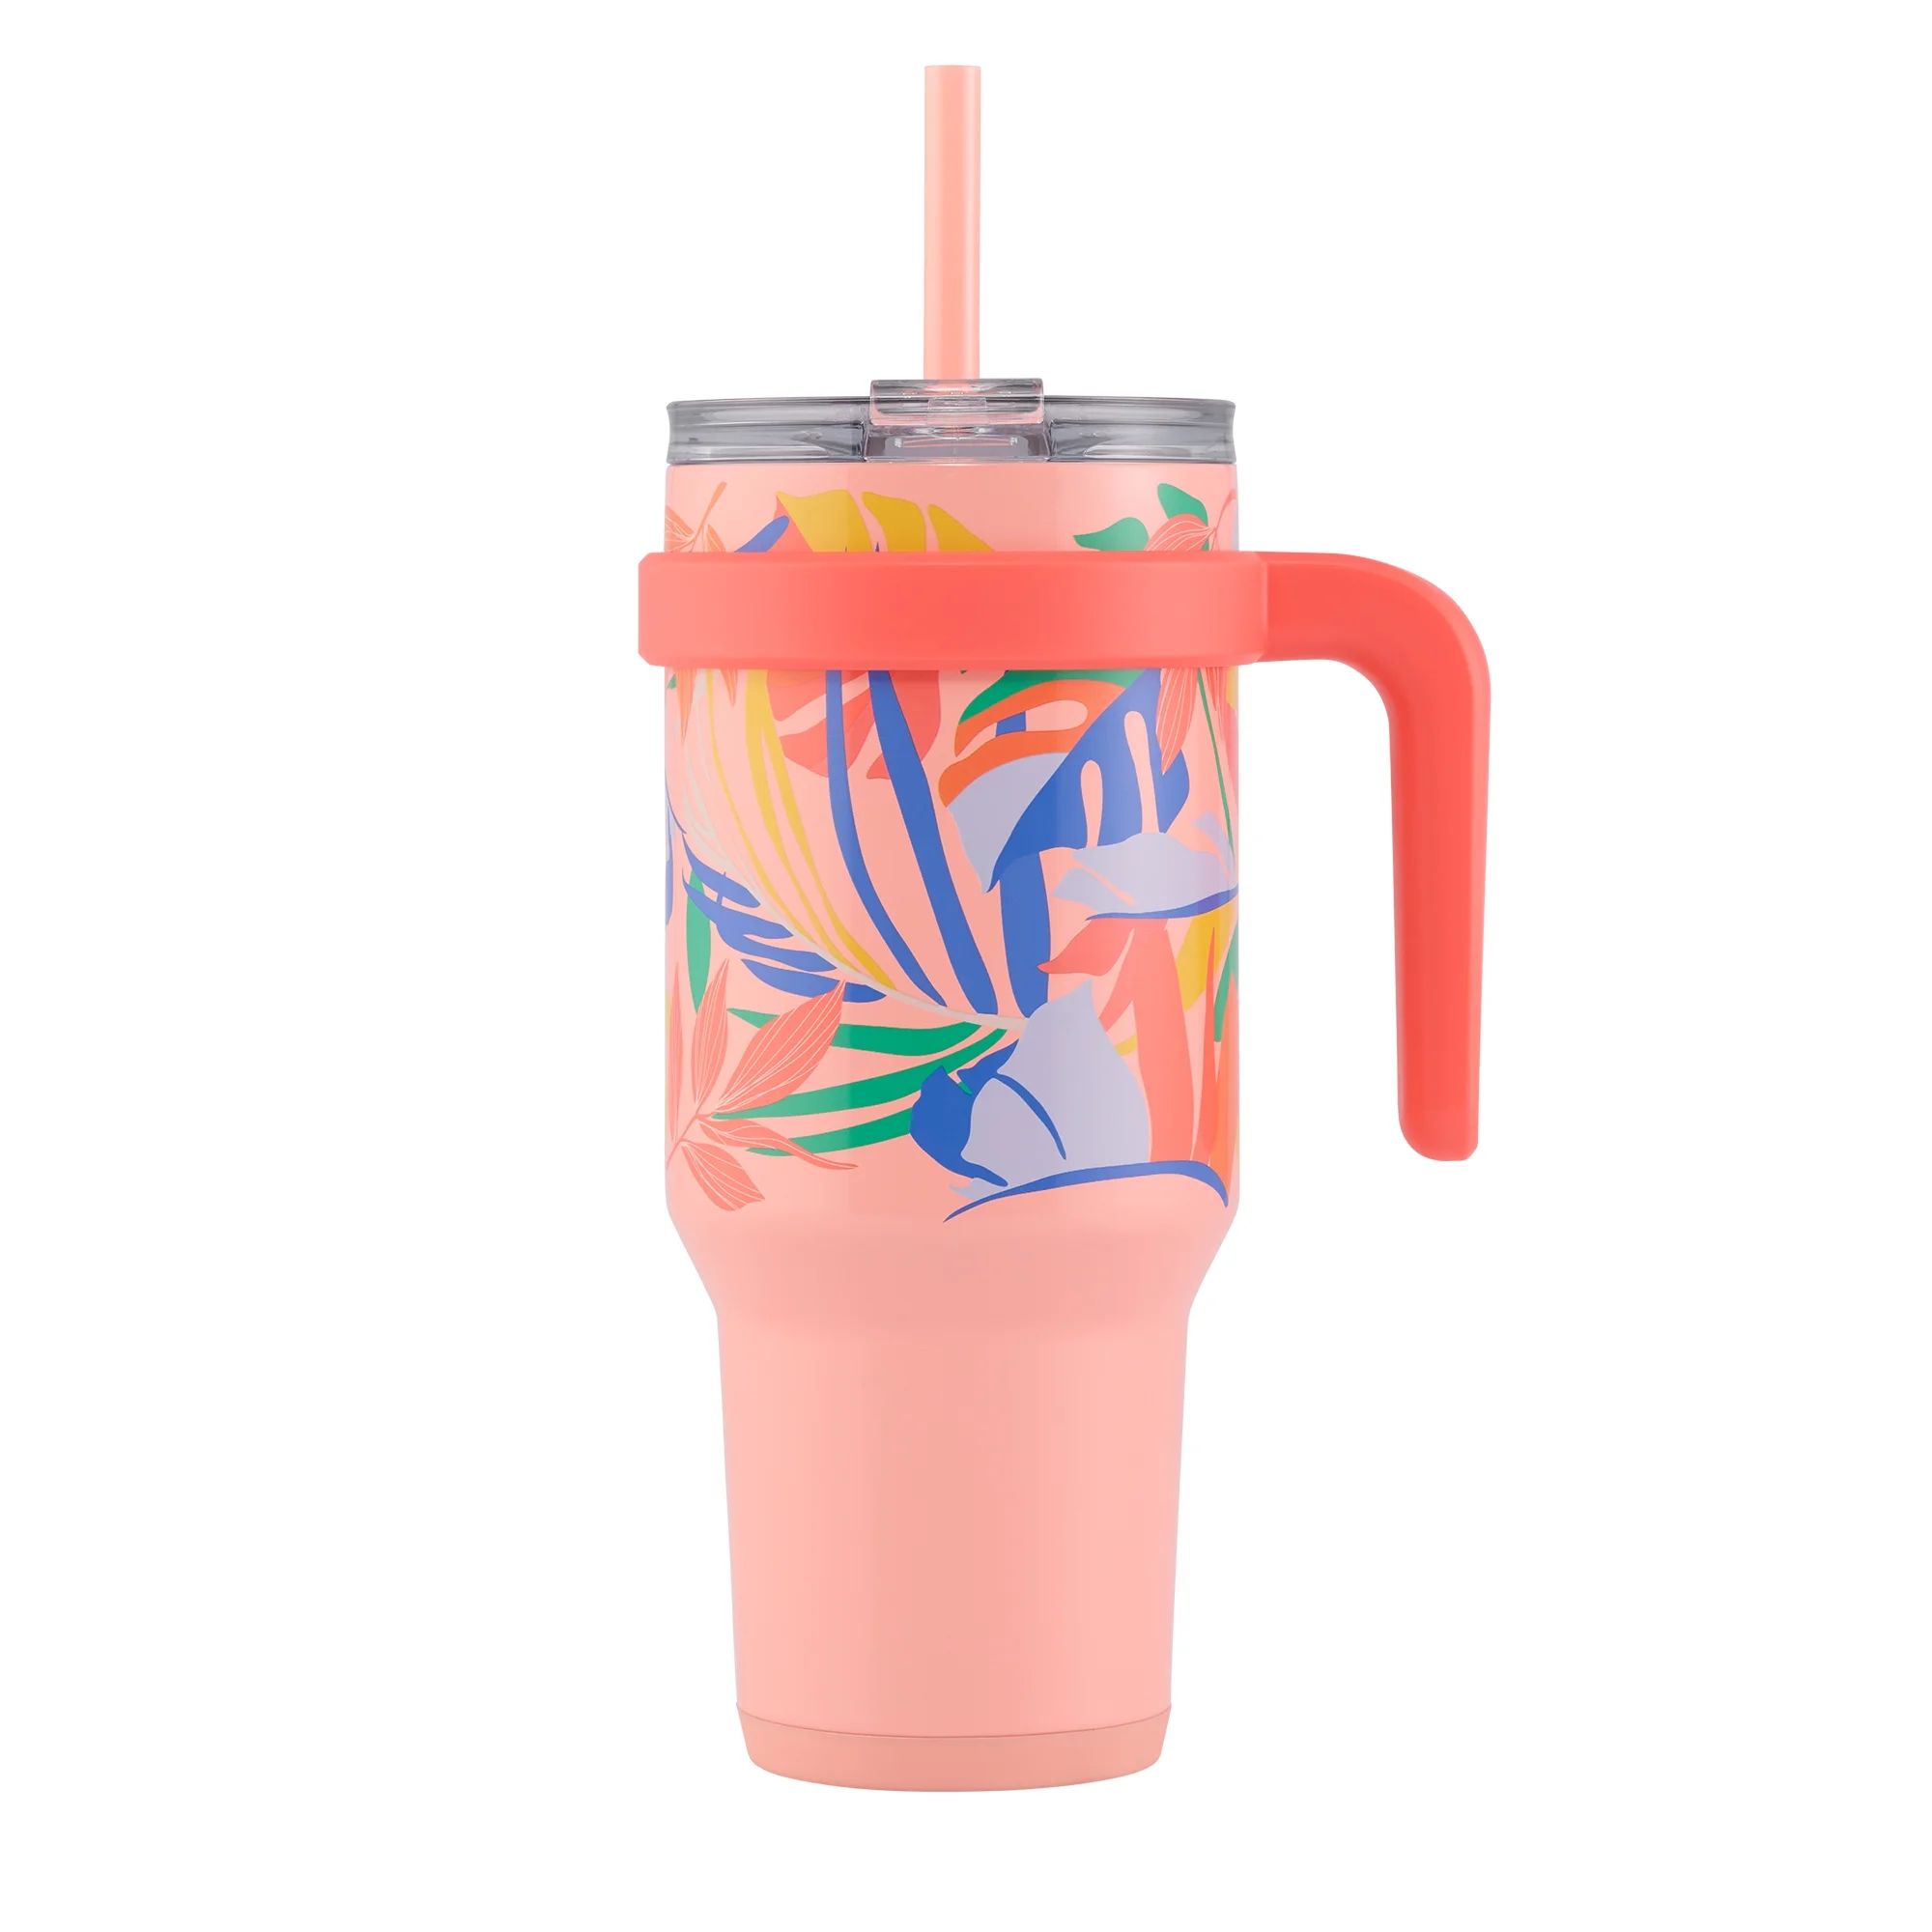 Reduce Slim Cold1 Tumbler - Straw, Lid & Handle. Insulated Stainless Steel 40oz, Peachy Tropics | Walmart (US)